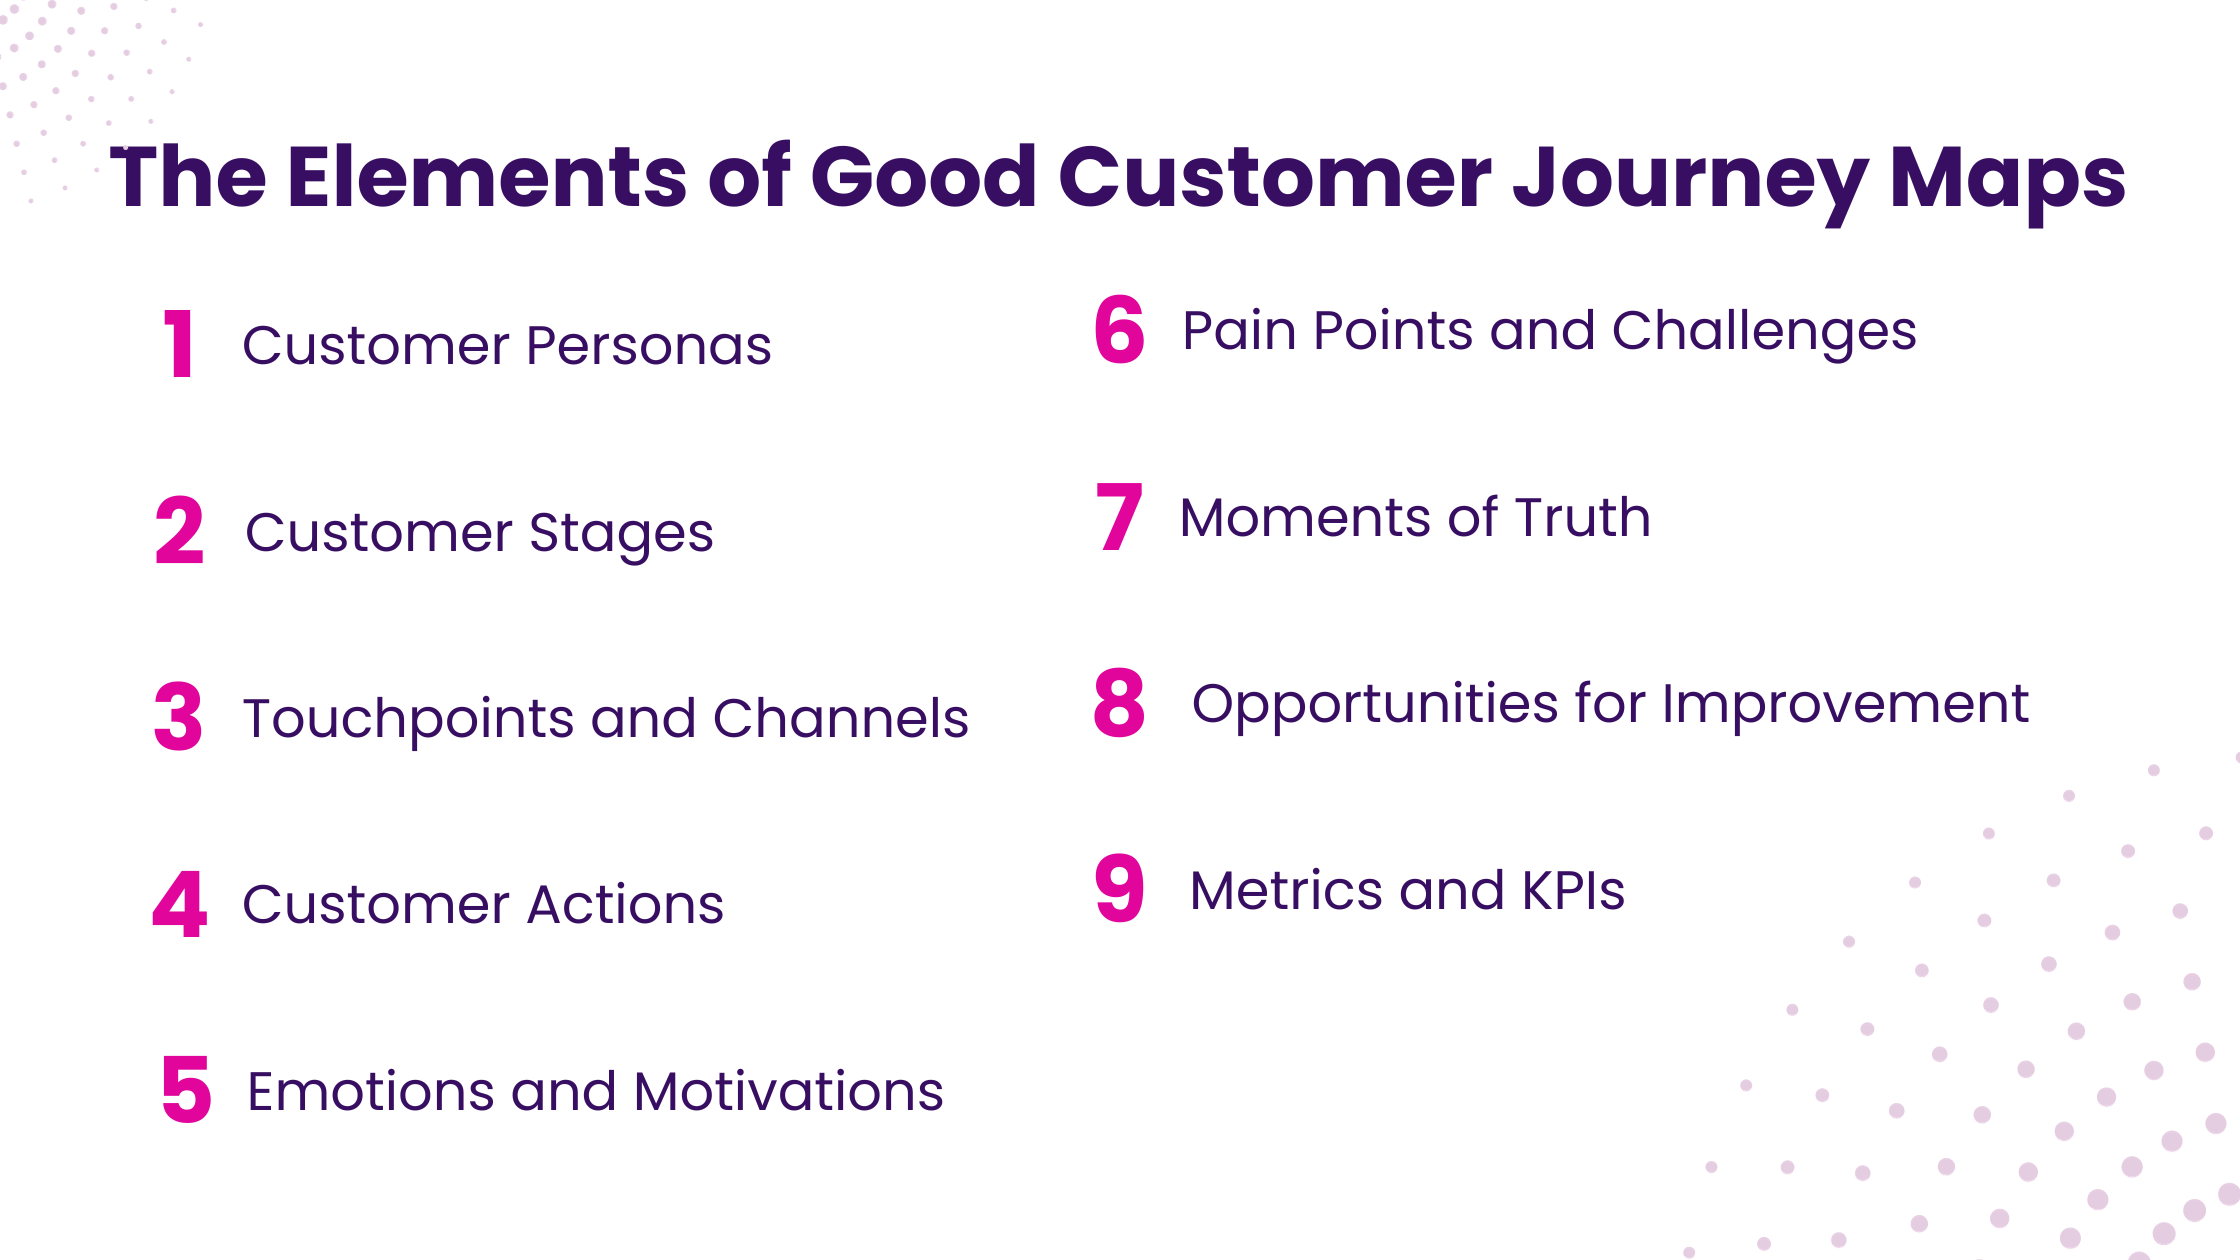 The Elements of Good Customer Journey Maps